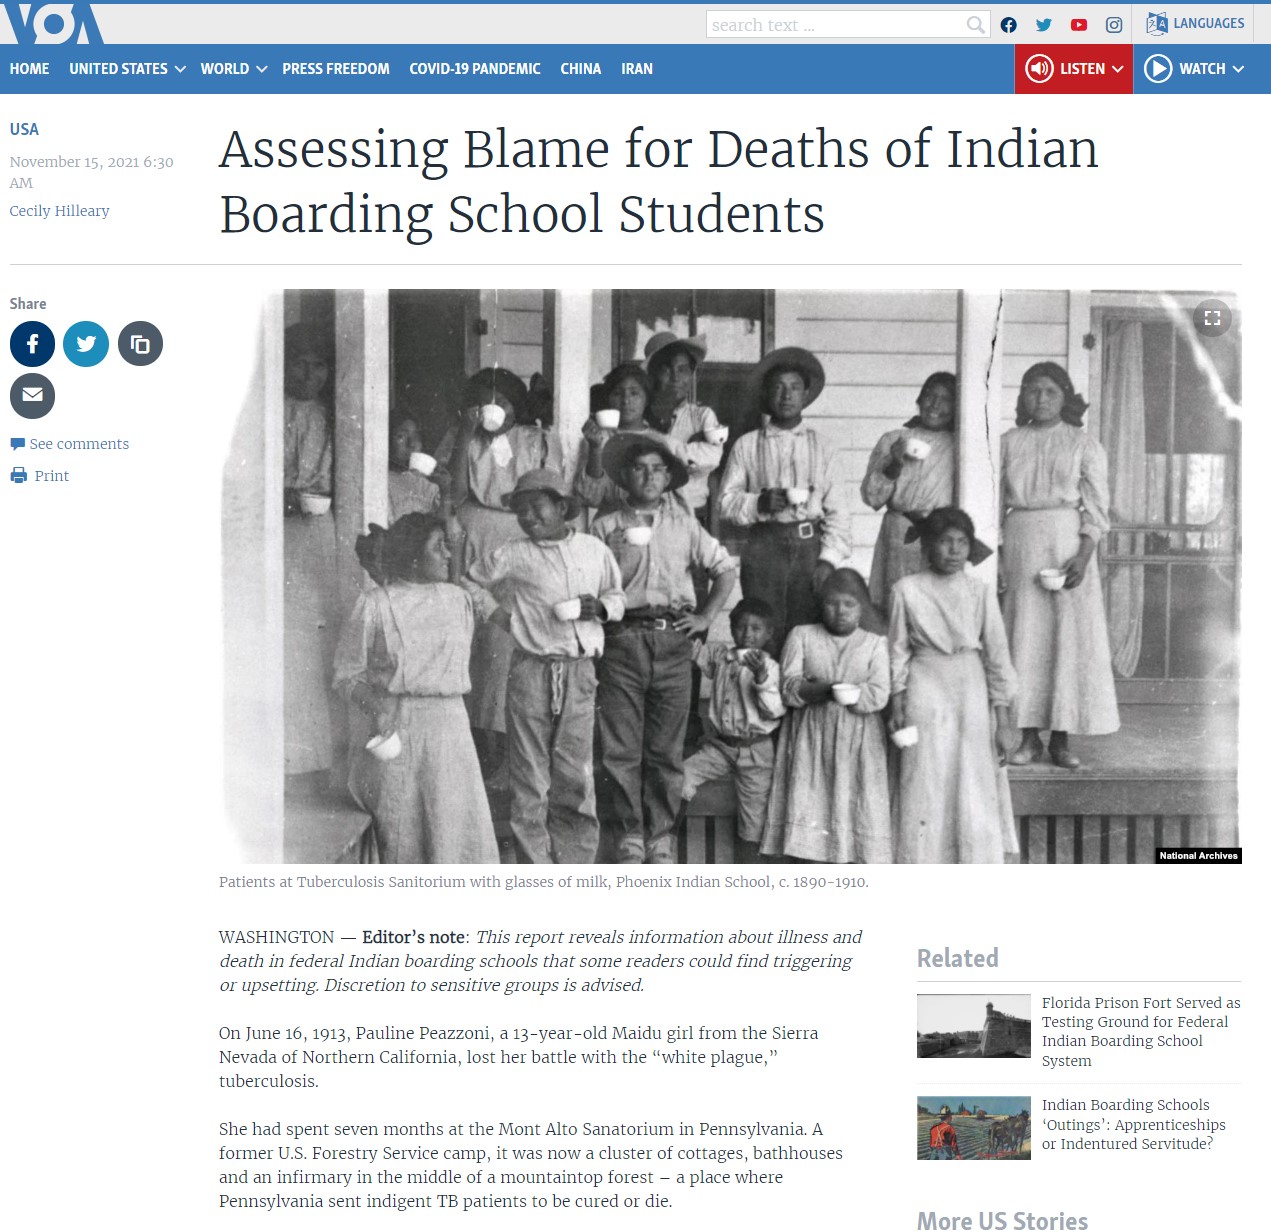 Snippet from the article "Assessing Blame for Deaths of Indian Boarding School Students" on the Voice of America website